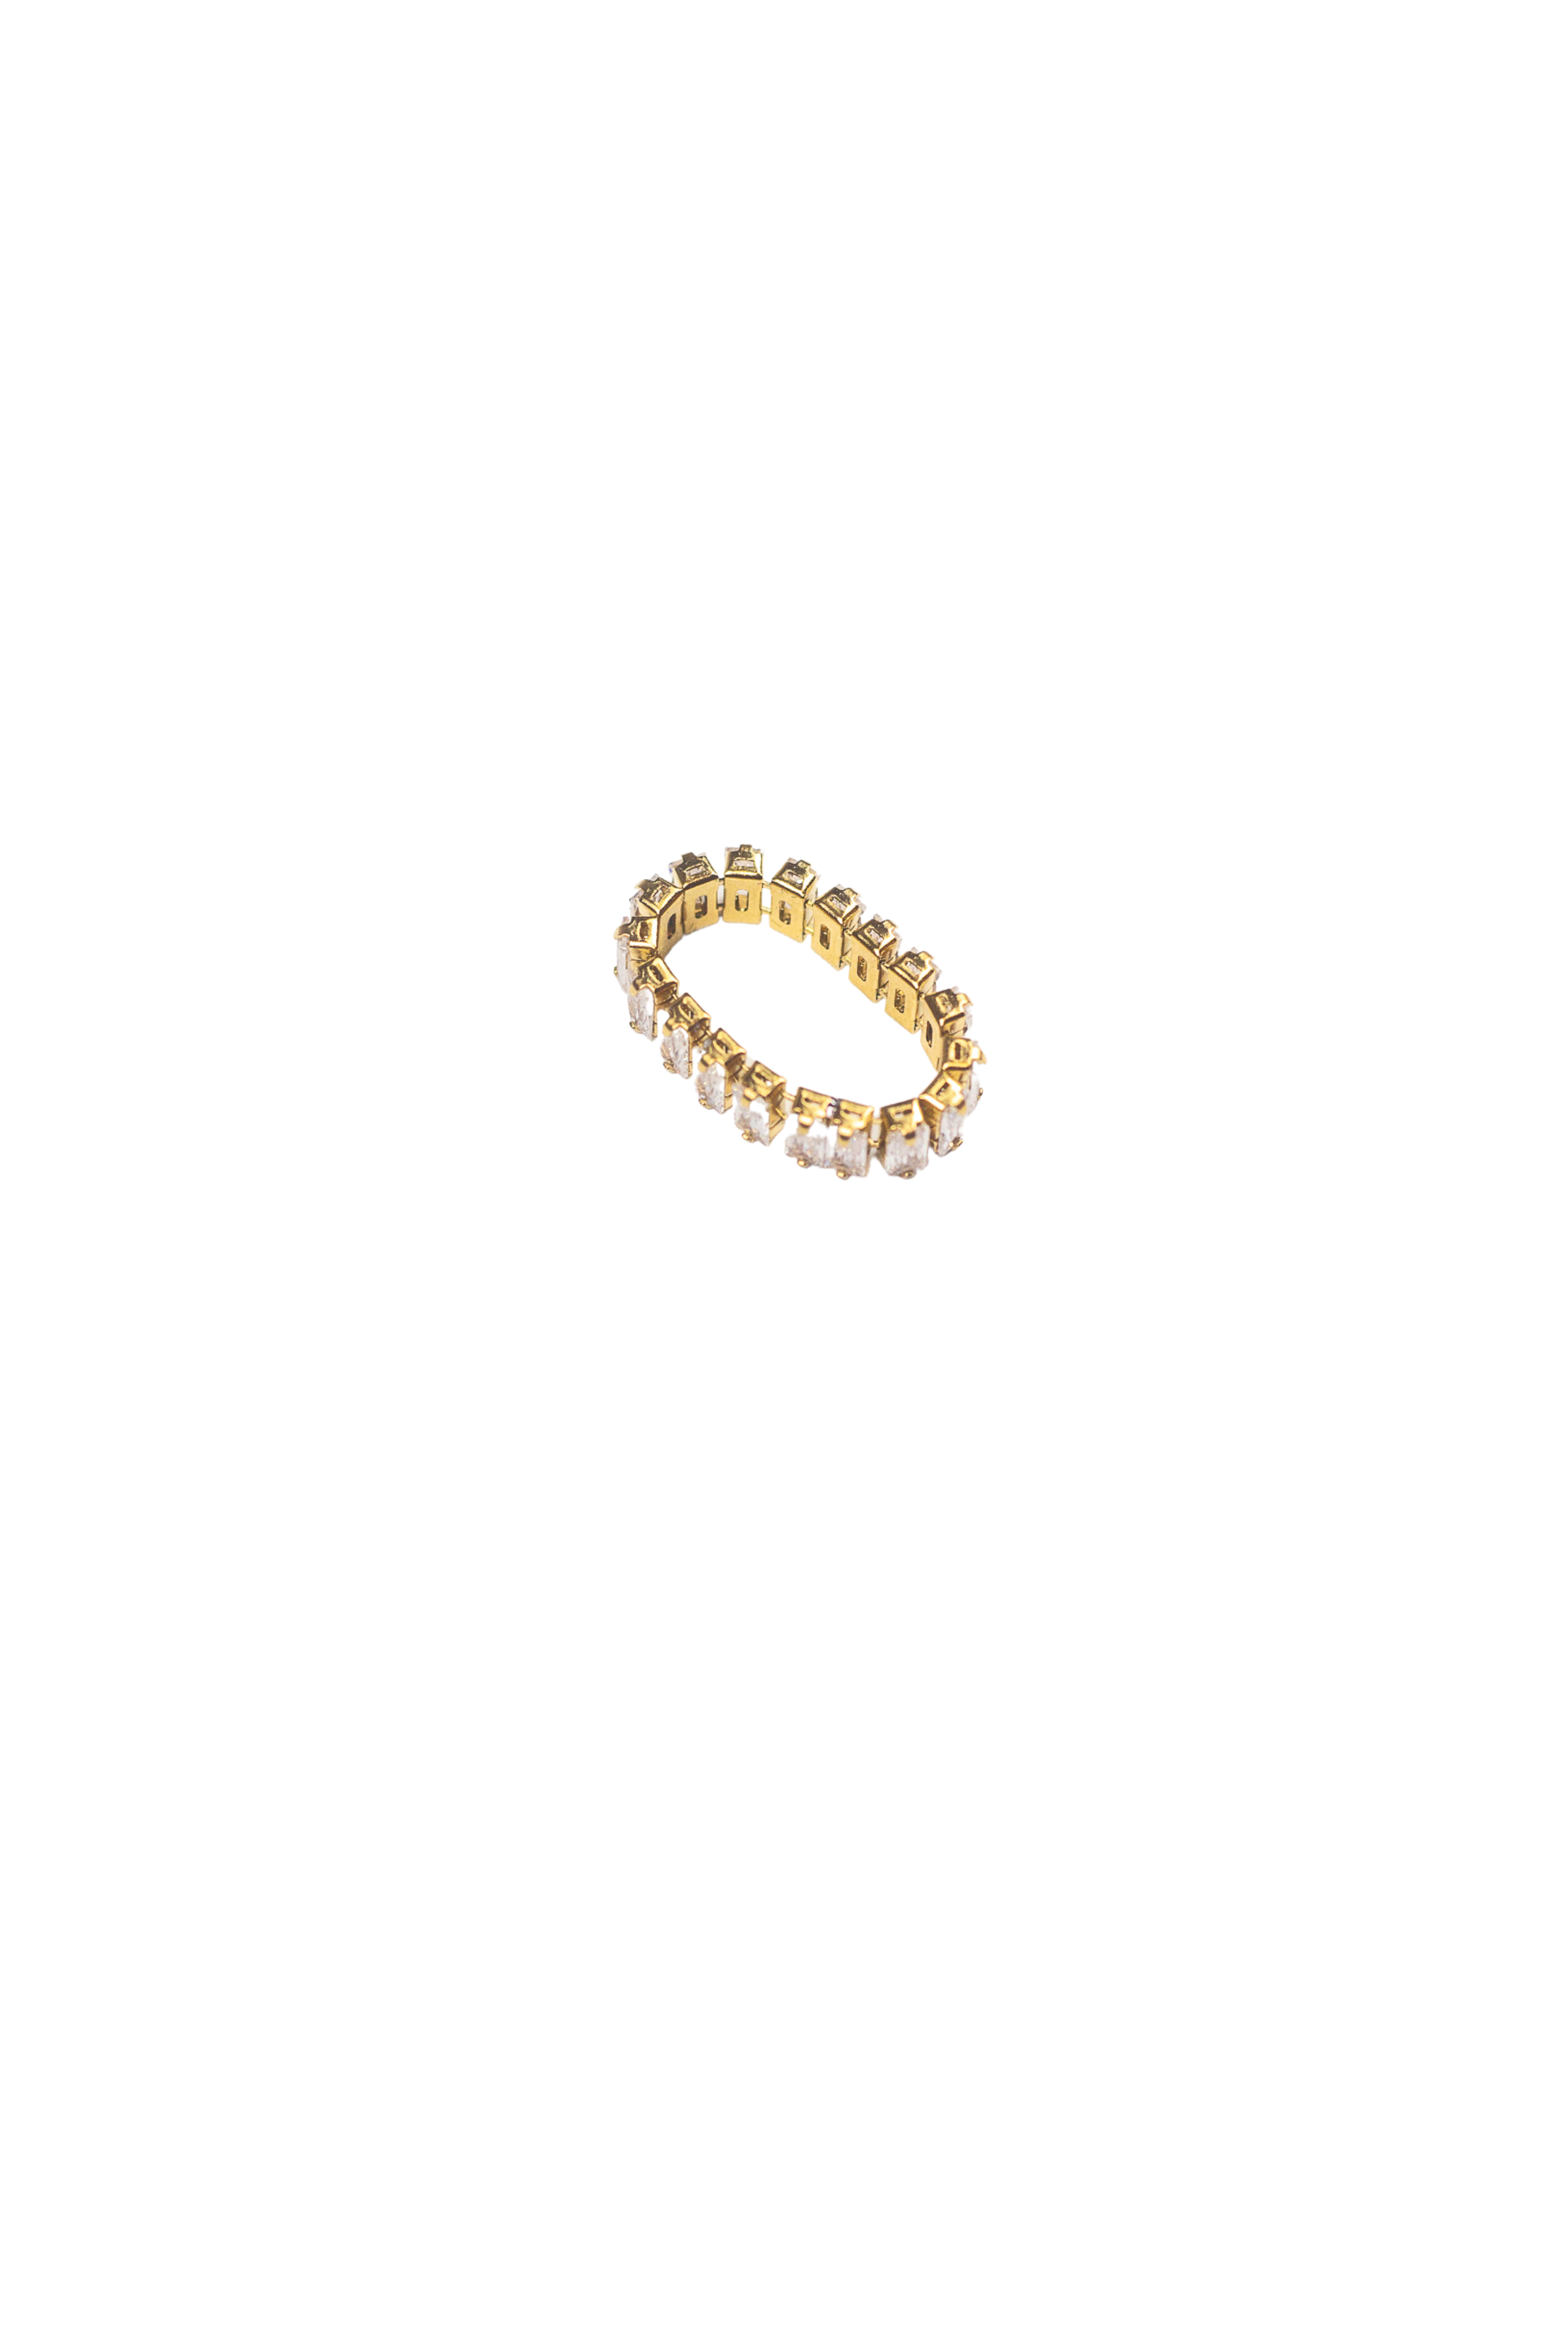 18k gold ring with white baguettes. Ella Tennis Ring by E's Element.